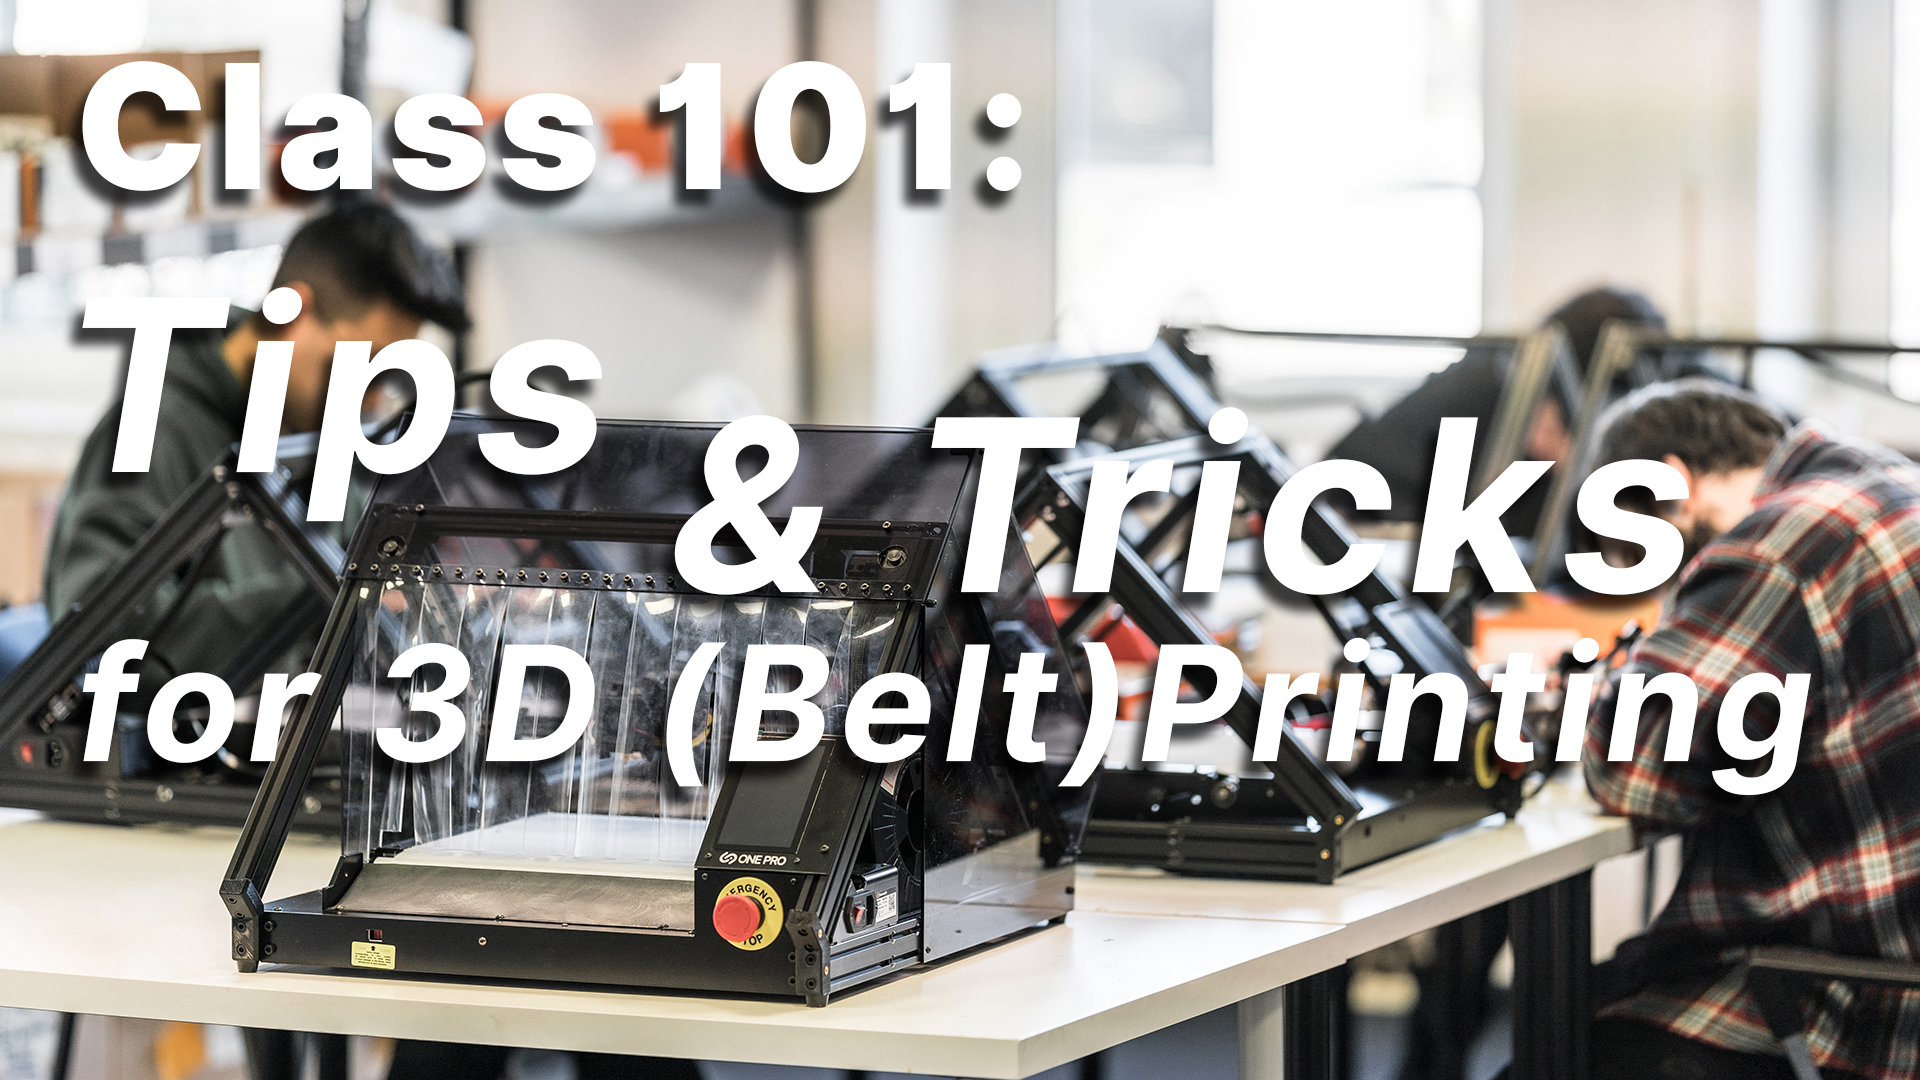 "Class 101: Tips & Tricks for 3D (Belt) Printing" is written above a shot of several conveyor belt printers on a large table, surrounded by people each bending over something on the table in front of them.